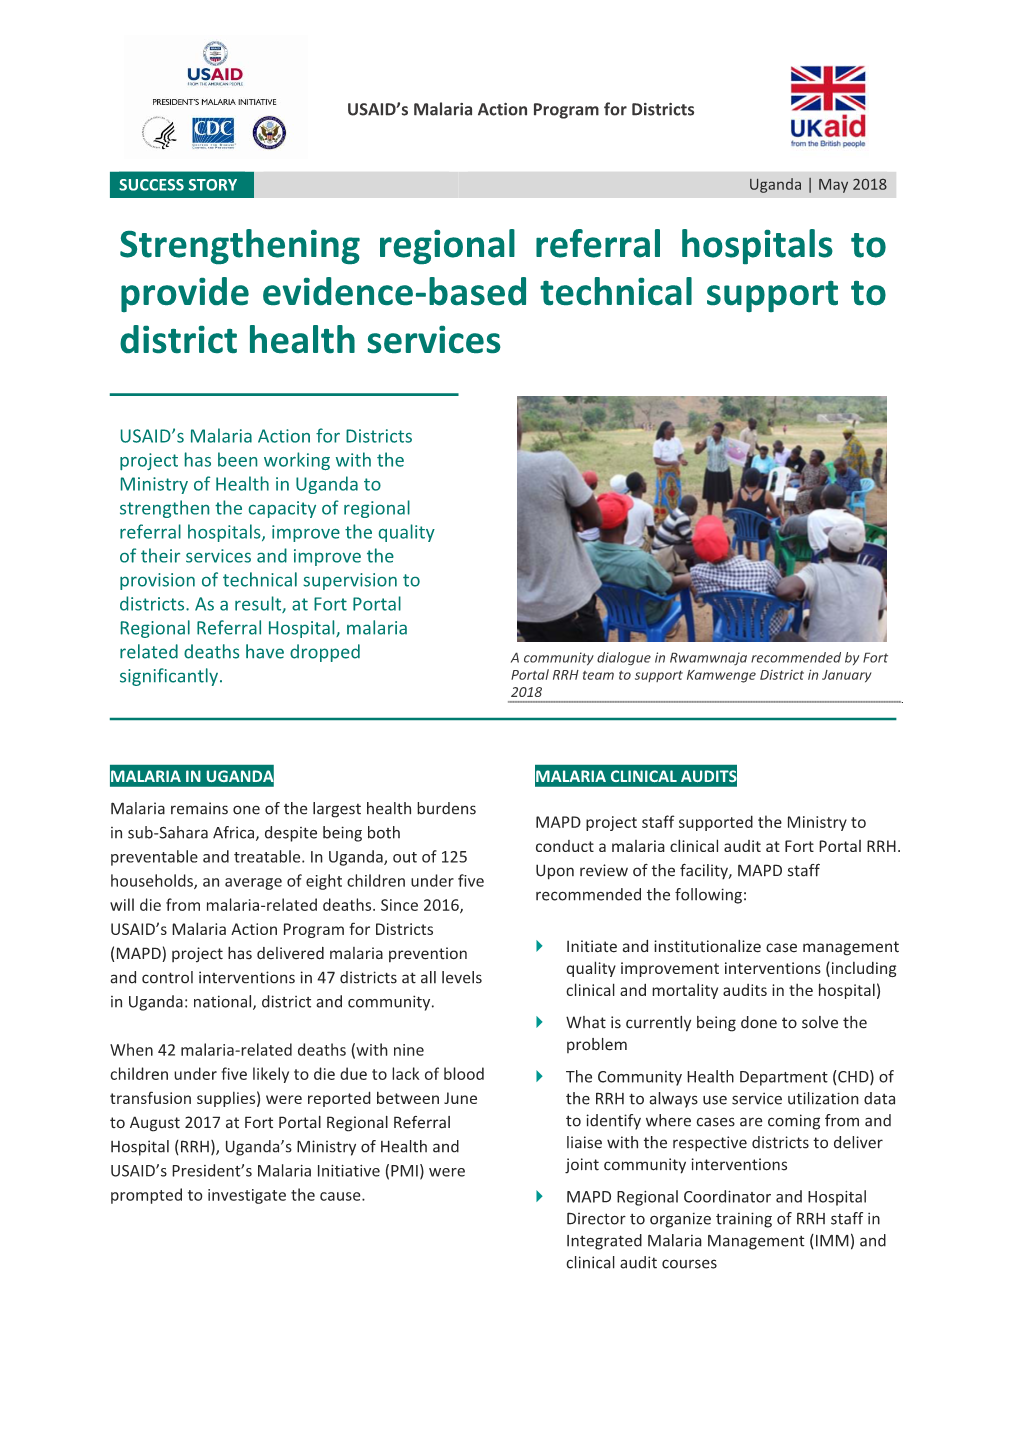 Strengthening Regional Referral Hospitals to Provide Evidence‐Based Technical Support to District Health Services